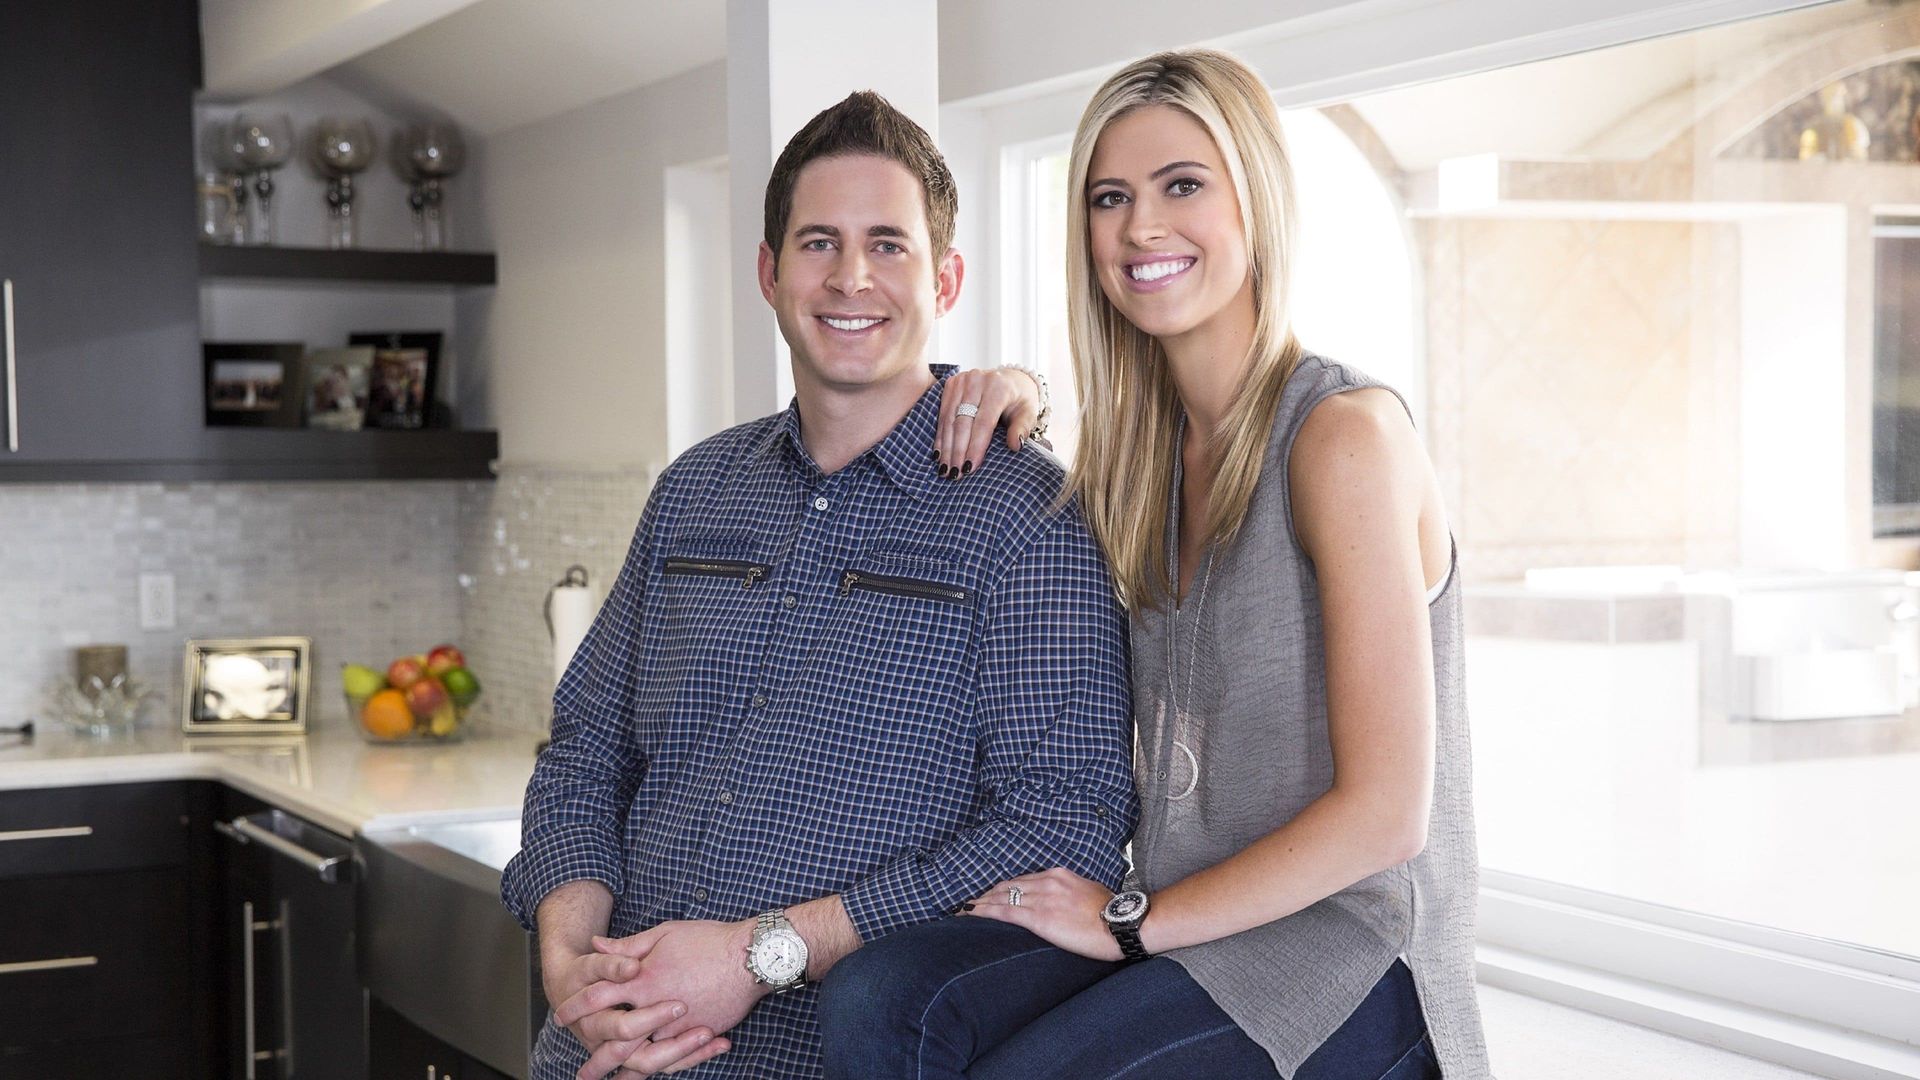 Flip or Flop Follow-Up background